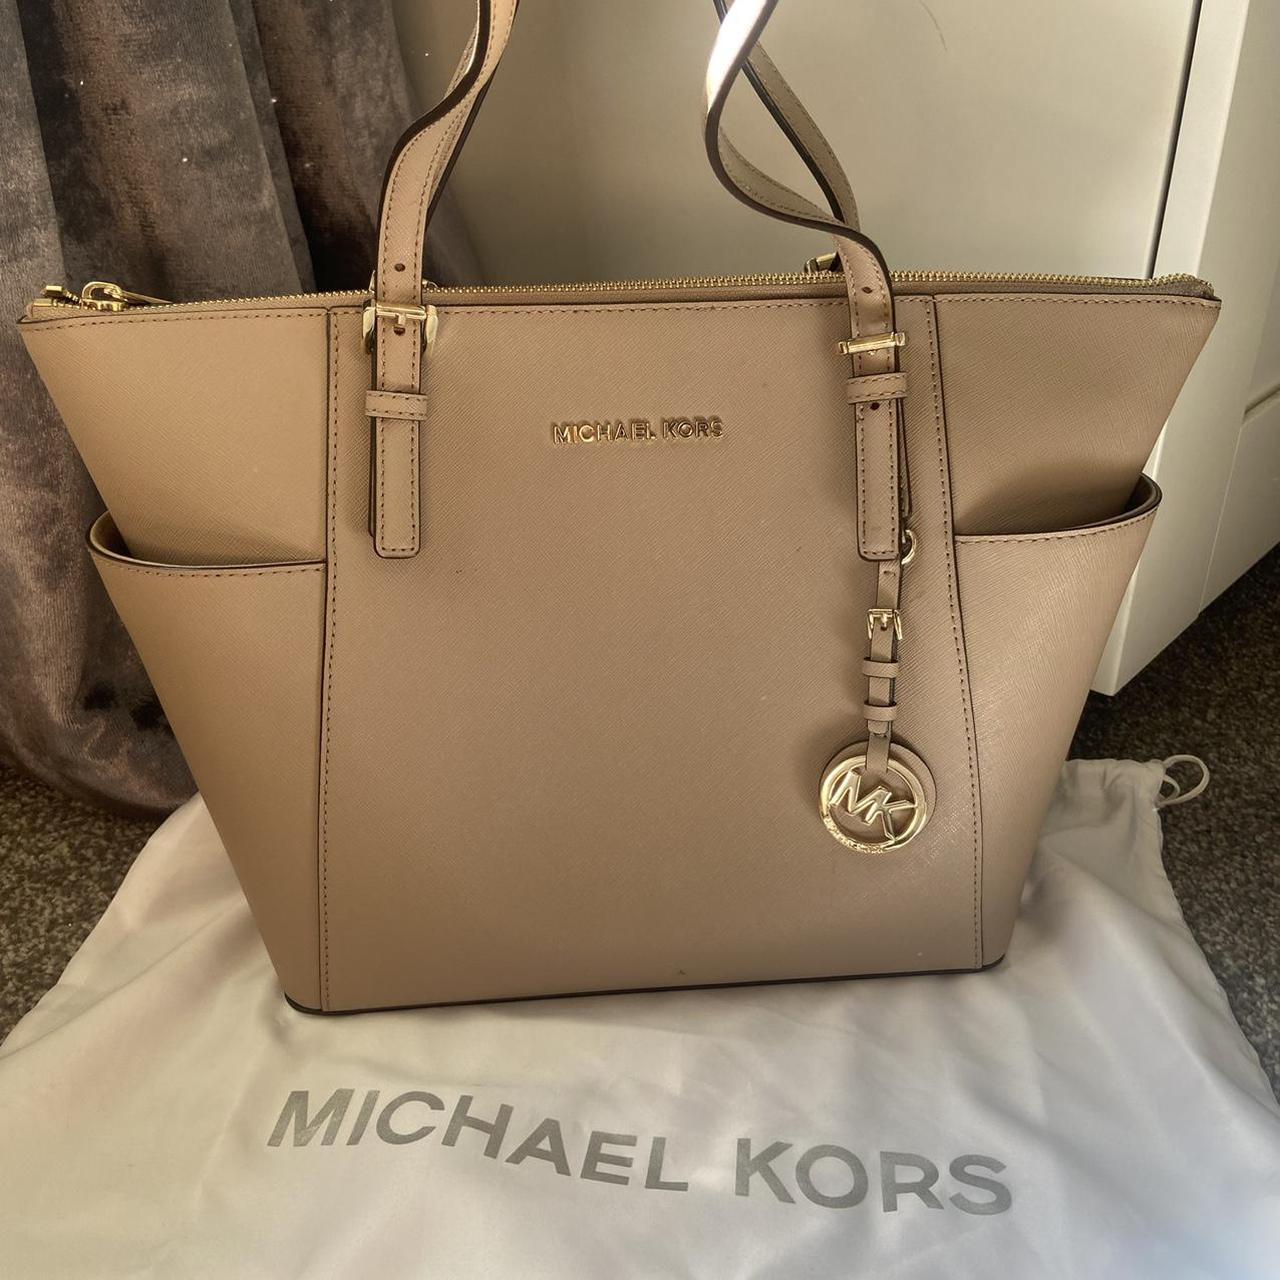 Pink and white michael kors bag used once perfect - Depop